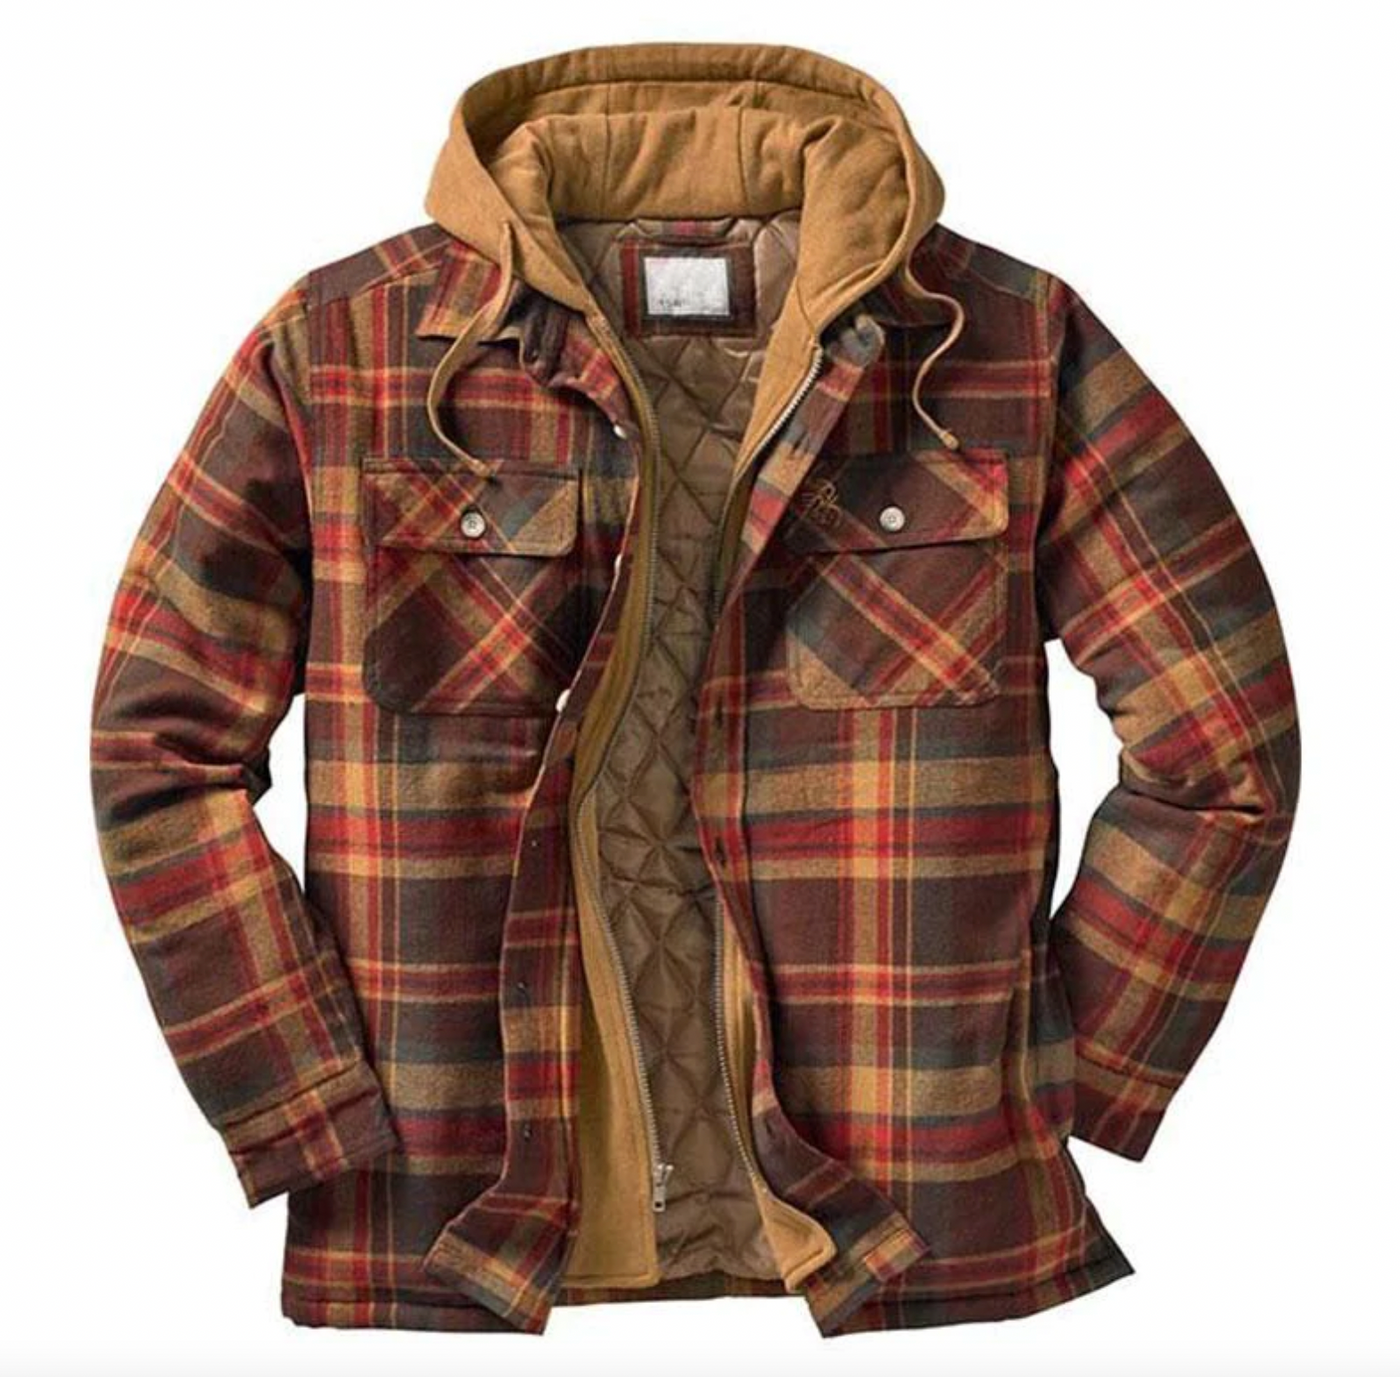 CRIS - Men's checked jacket with hood for autumn and winter 